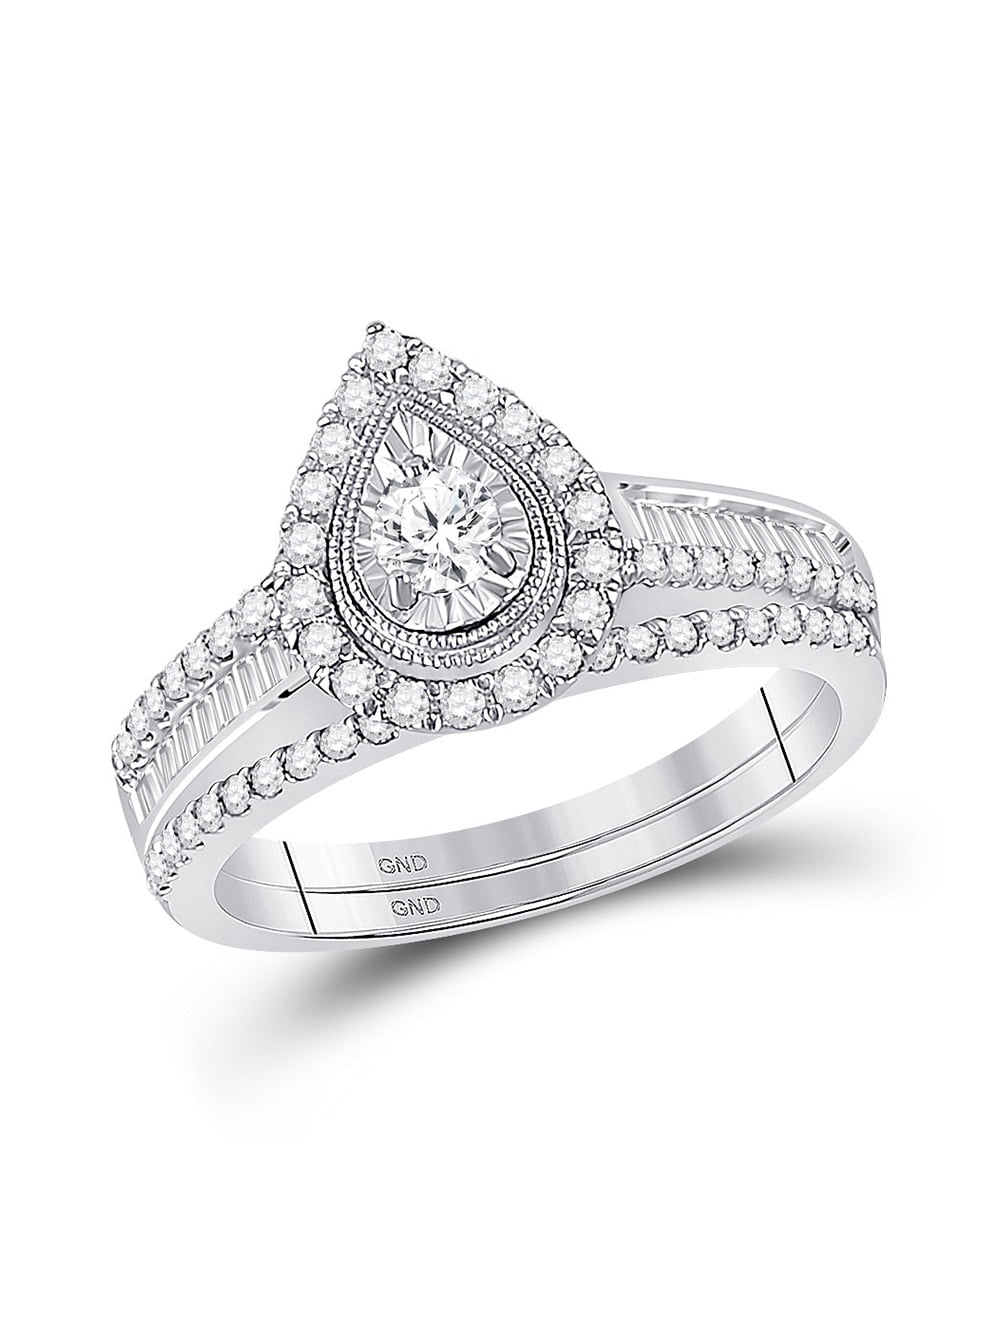 Details about   3Ct White Princess Bar Set Diamond Engagement Wedding Ring 925 Sterling Silver